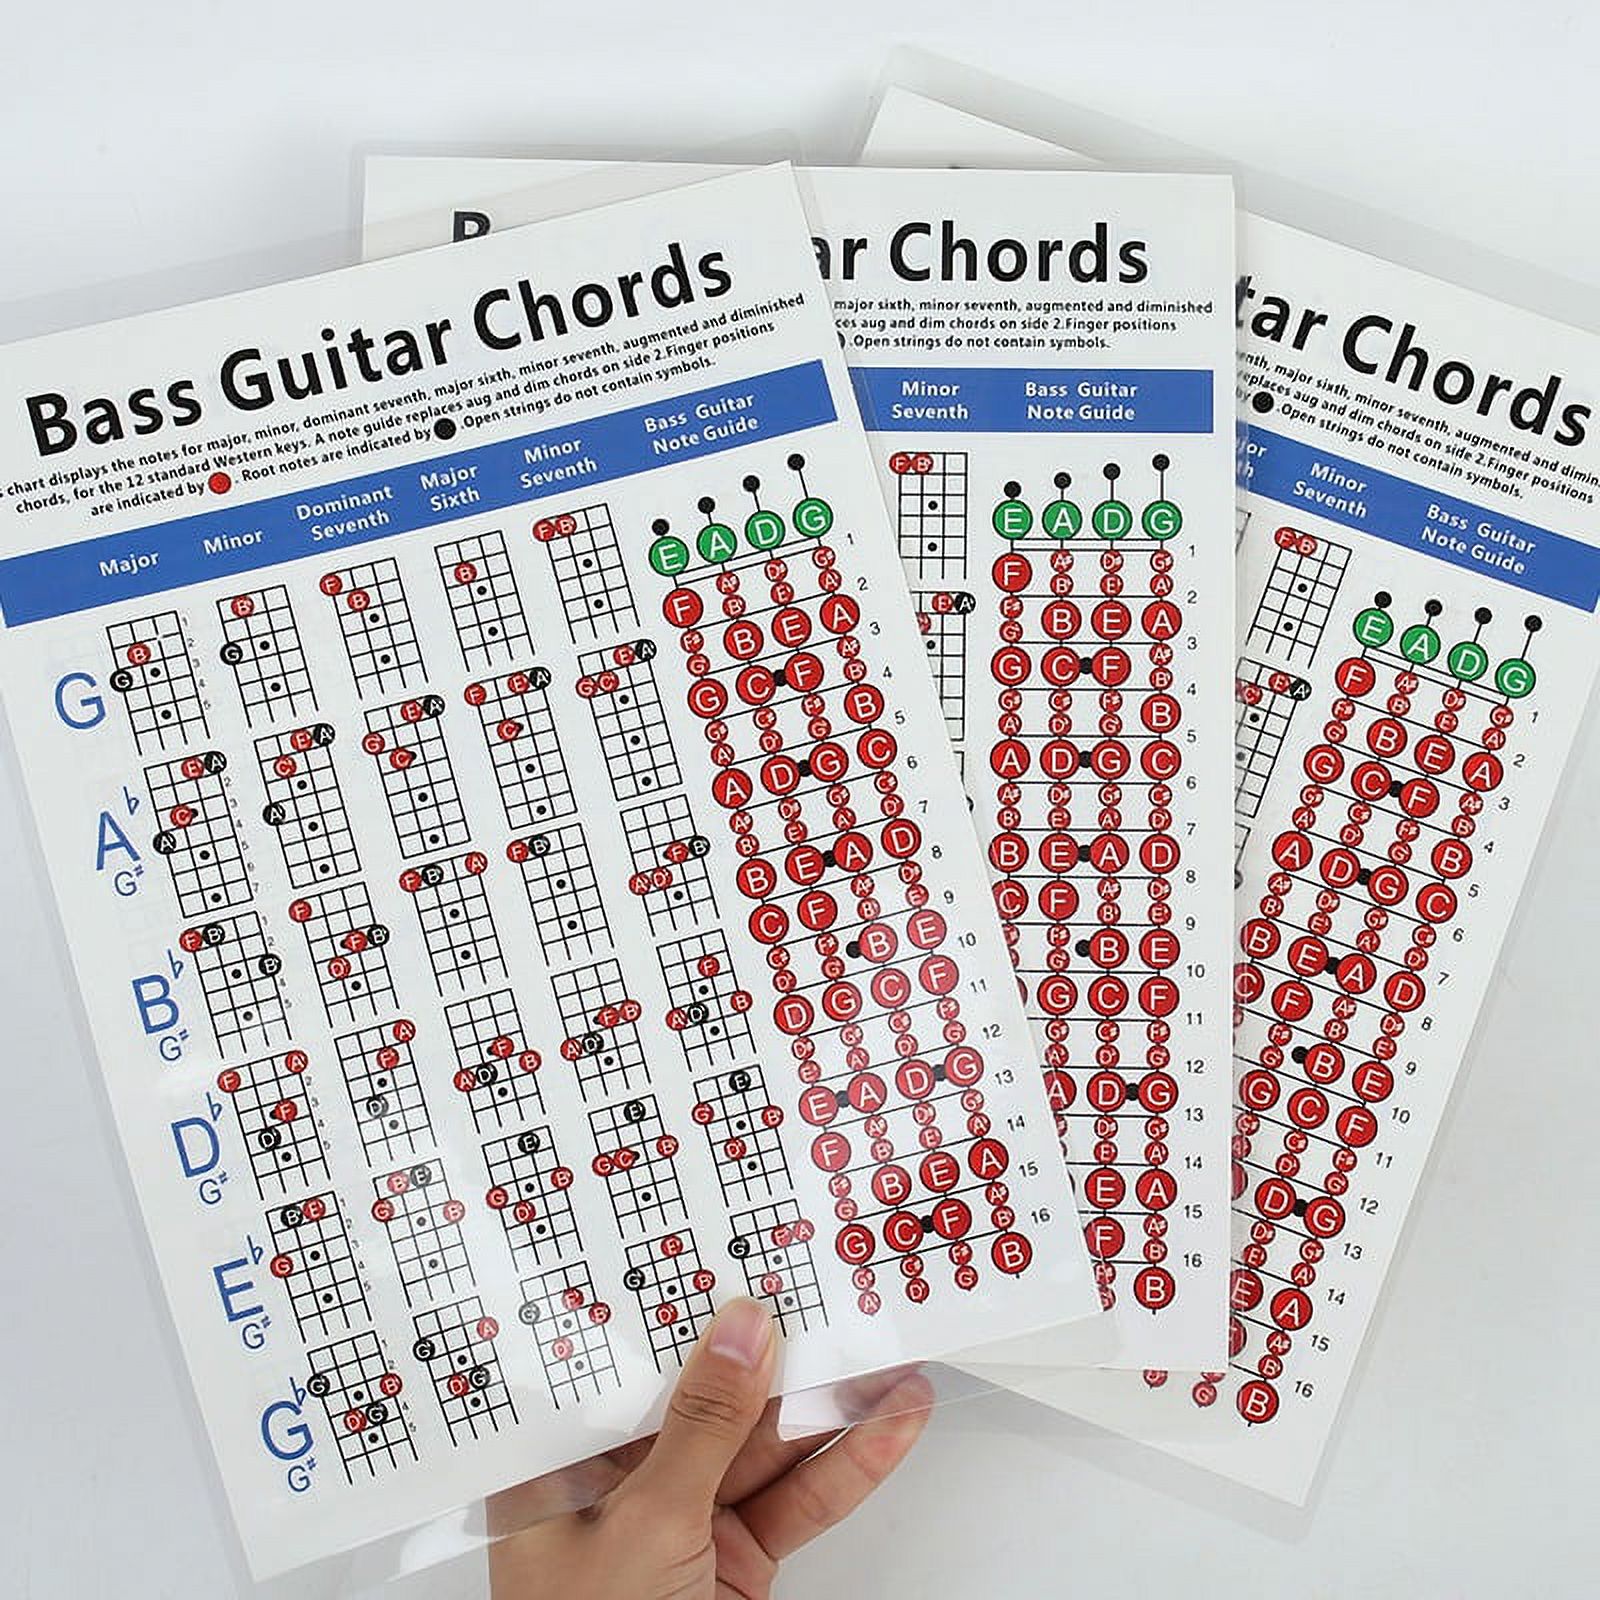 Electric Guitar Chord Chart 4 String Guitar Chord Fingering Exercise ...